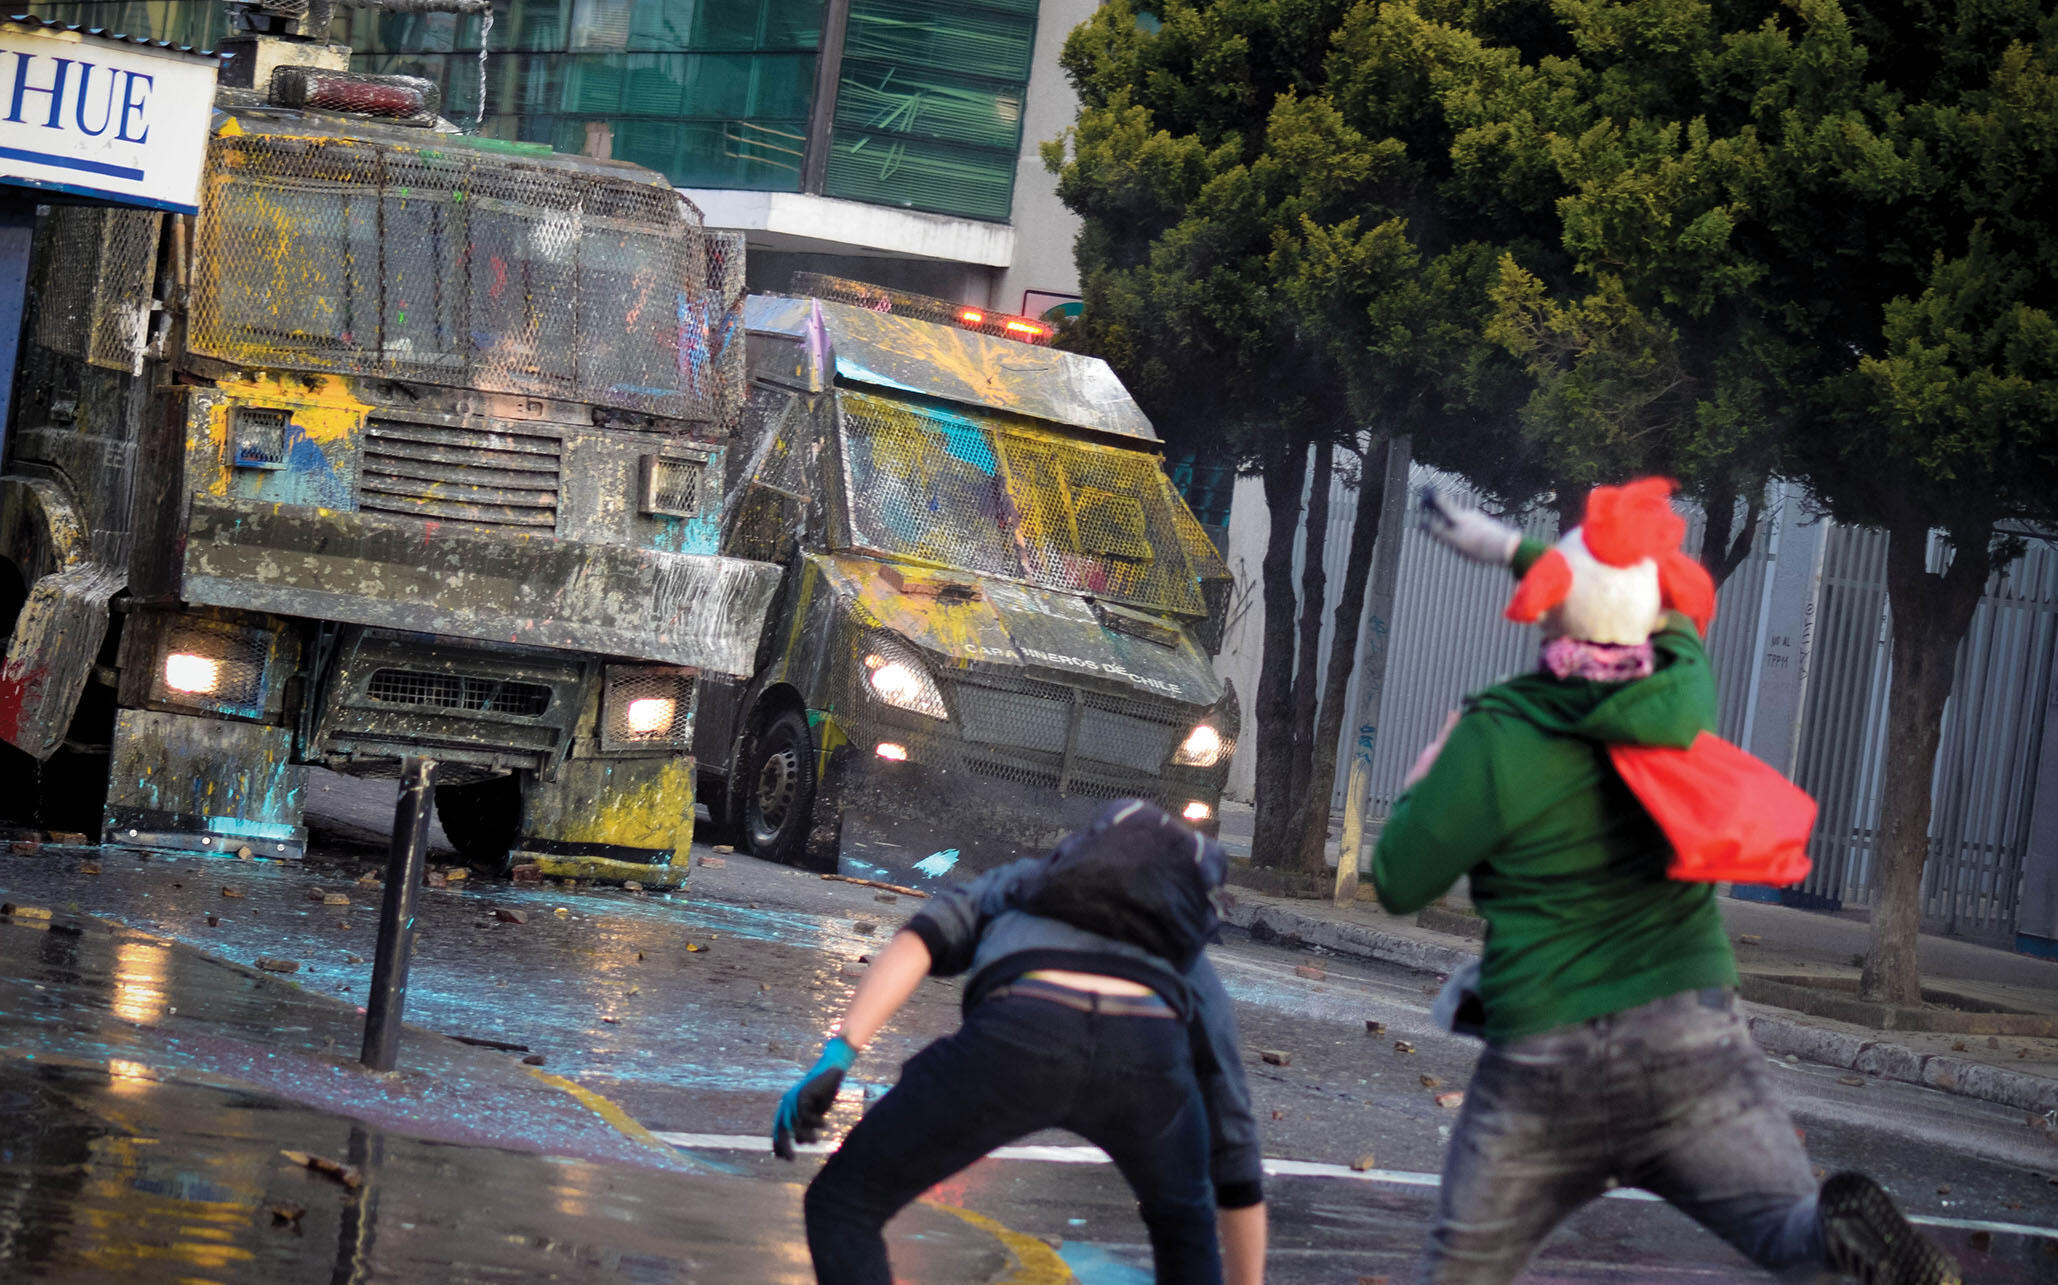 Demonstrators throw paint at police vehicles in Santiago, November 2019. (Photo by cameramemories.)